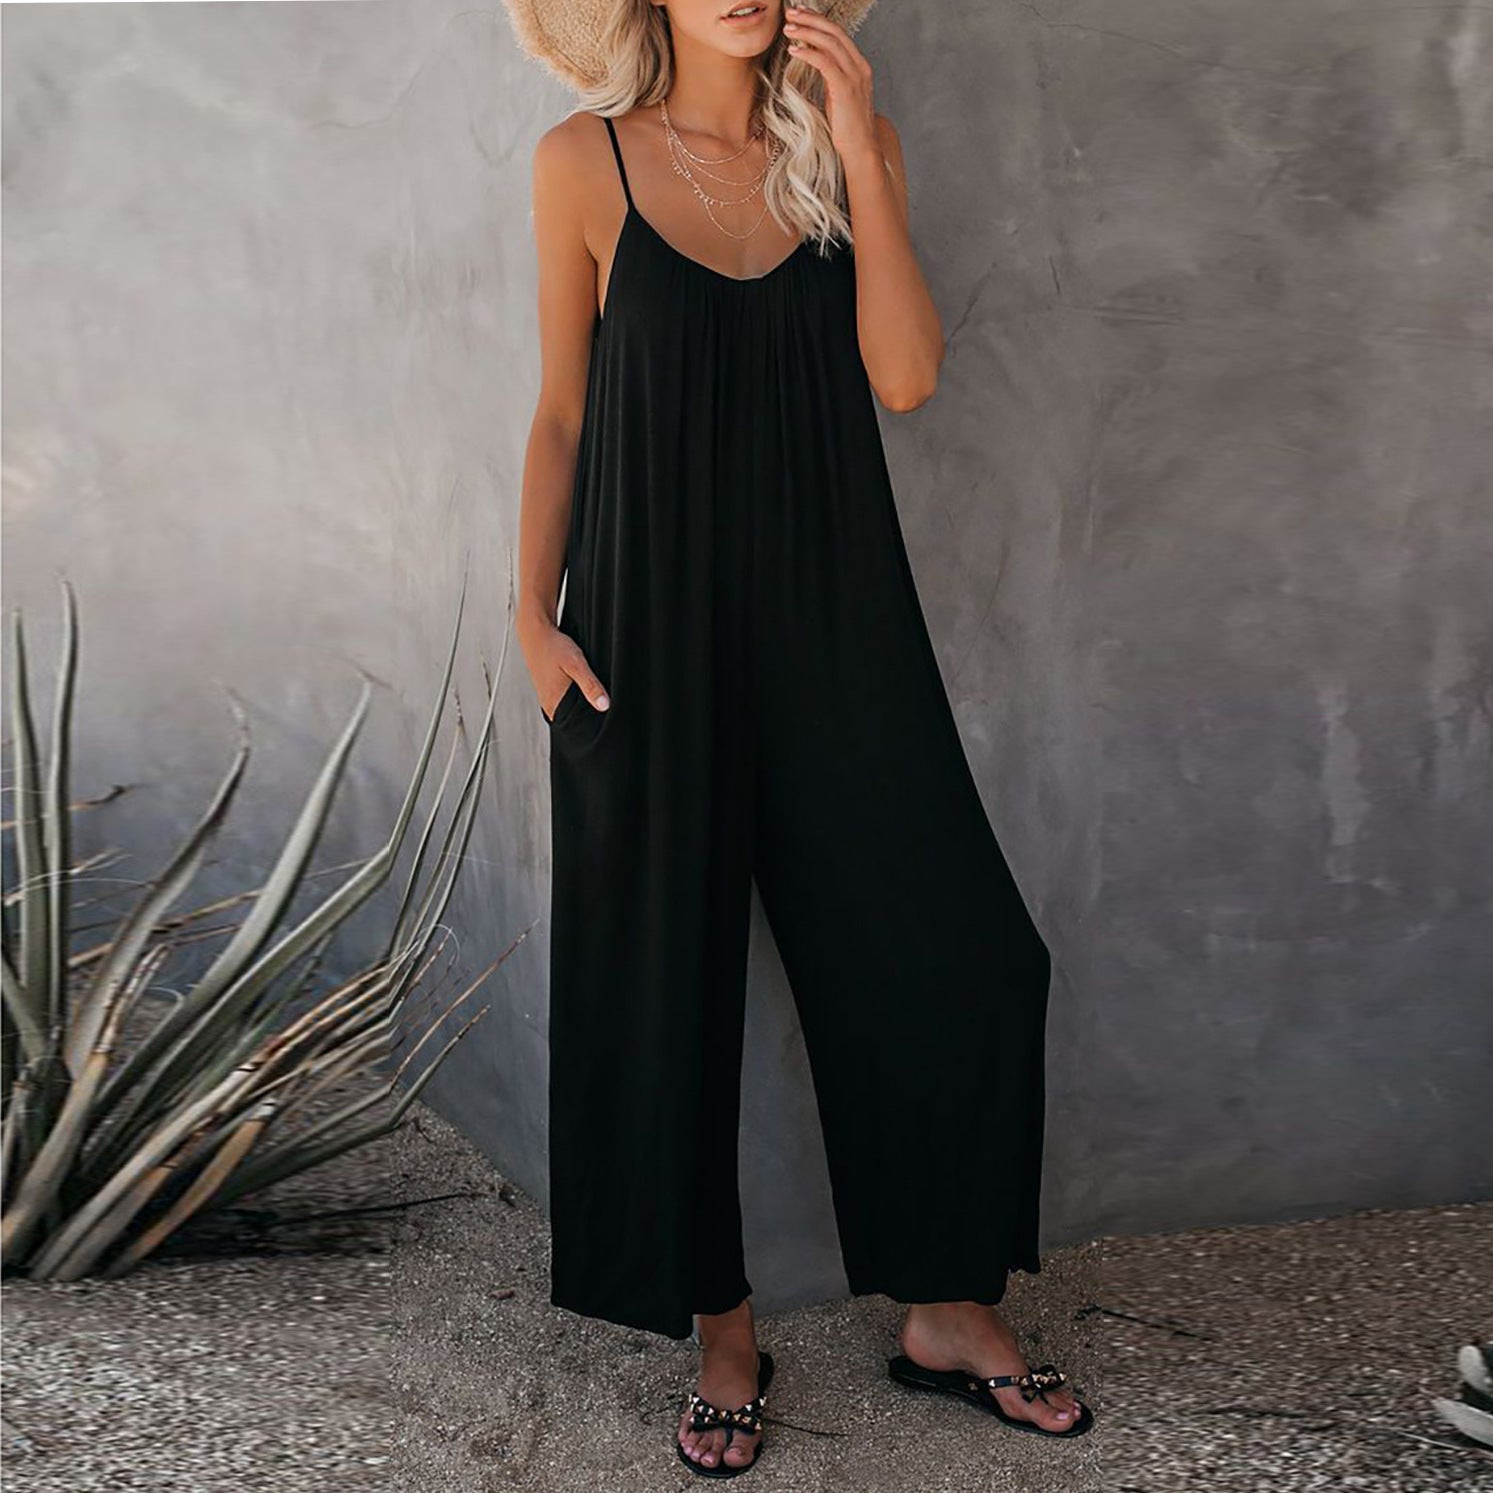 Women's Sling Summer Solid Sleeveless Color Pocket Casual Jumpsuit